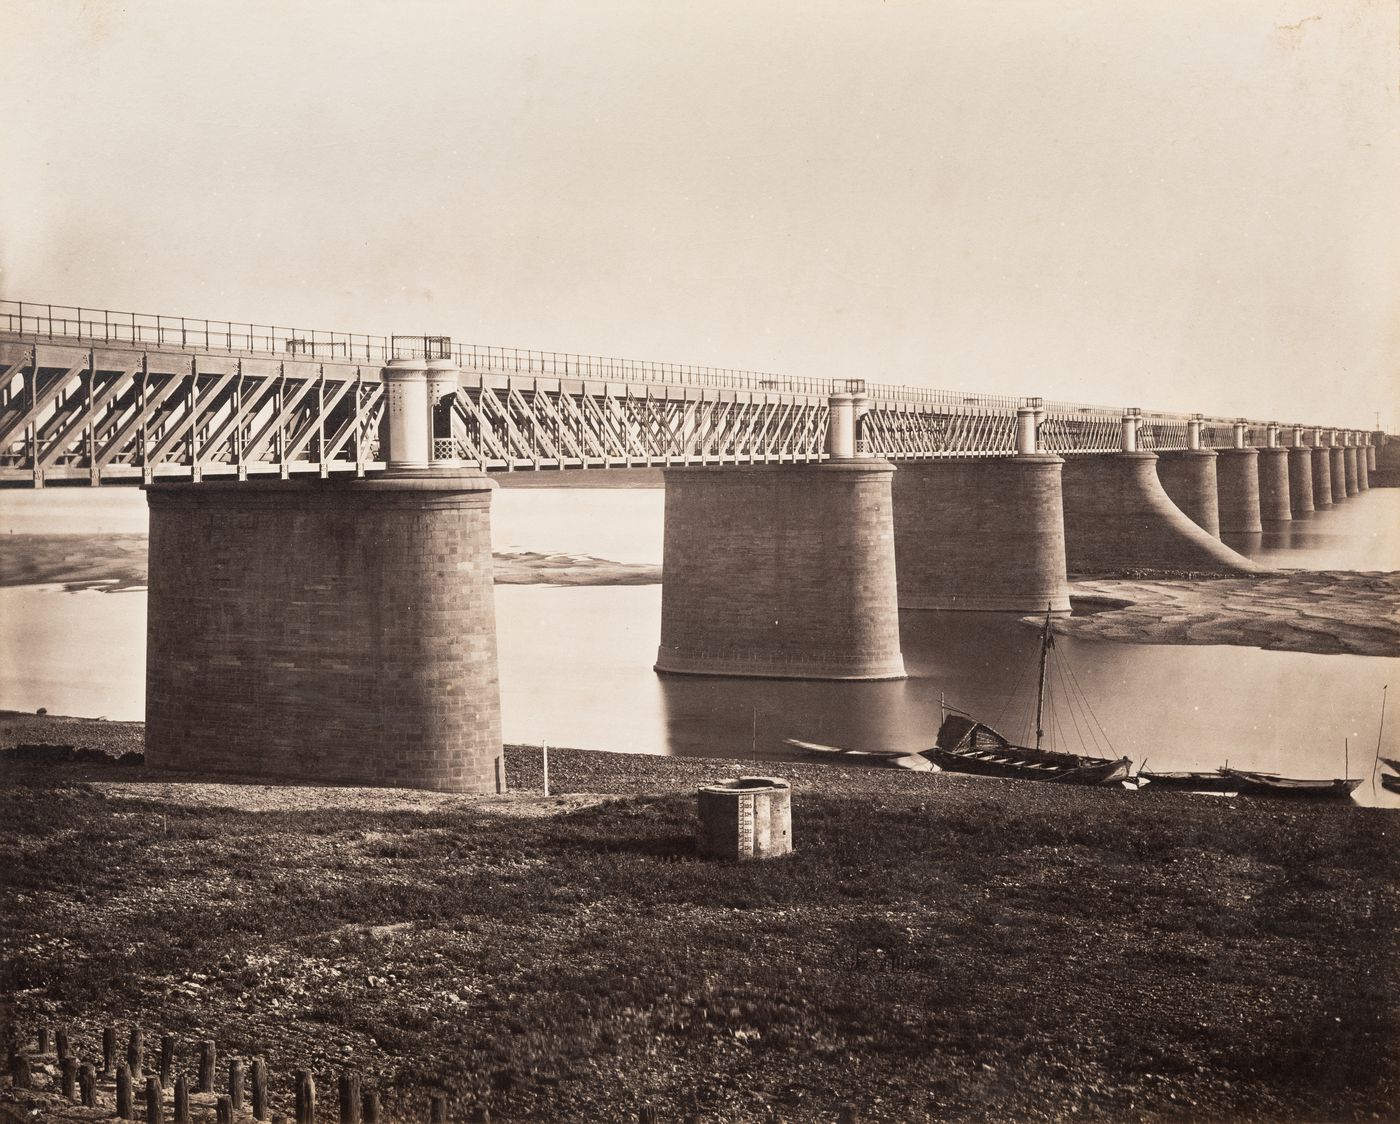 View of a railroad bridge, possibly known as the Papaman Bridge, across the Yamuna River (also known as the Jumna River), Allahabad, India